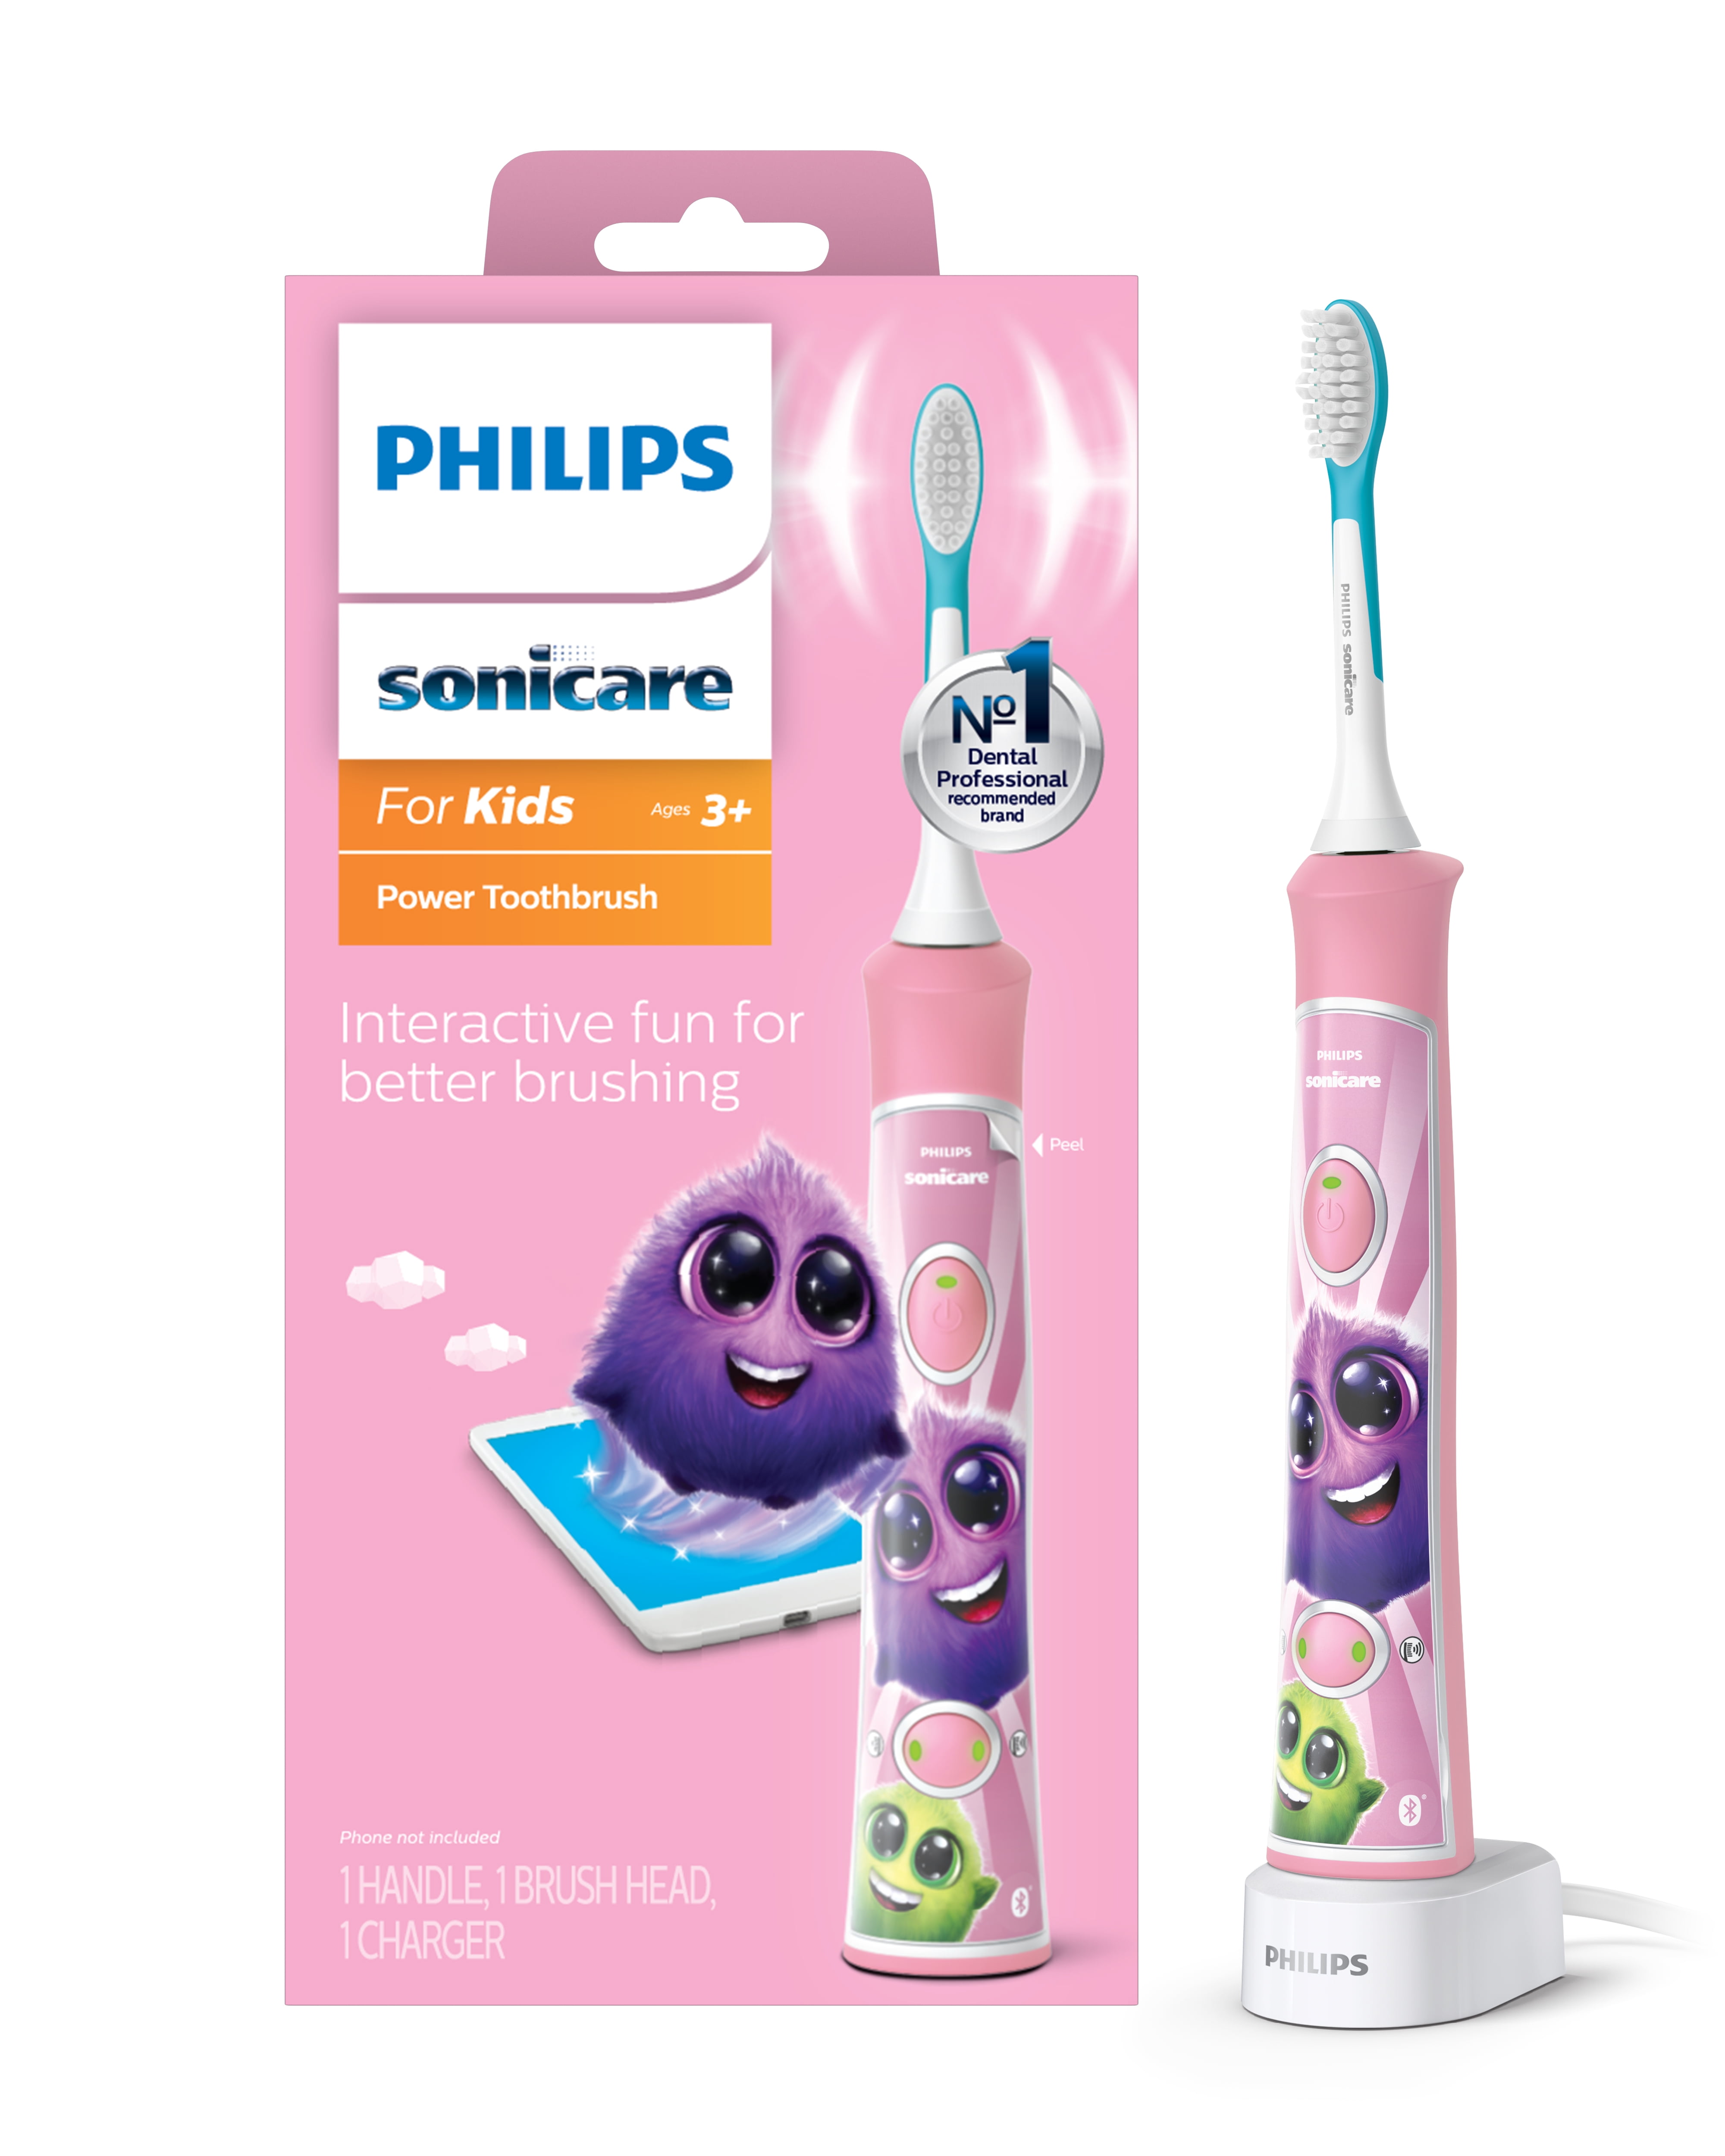 Philips Sonicare For Kids Electric Toothbrush | lupon.gov.ph